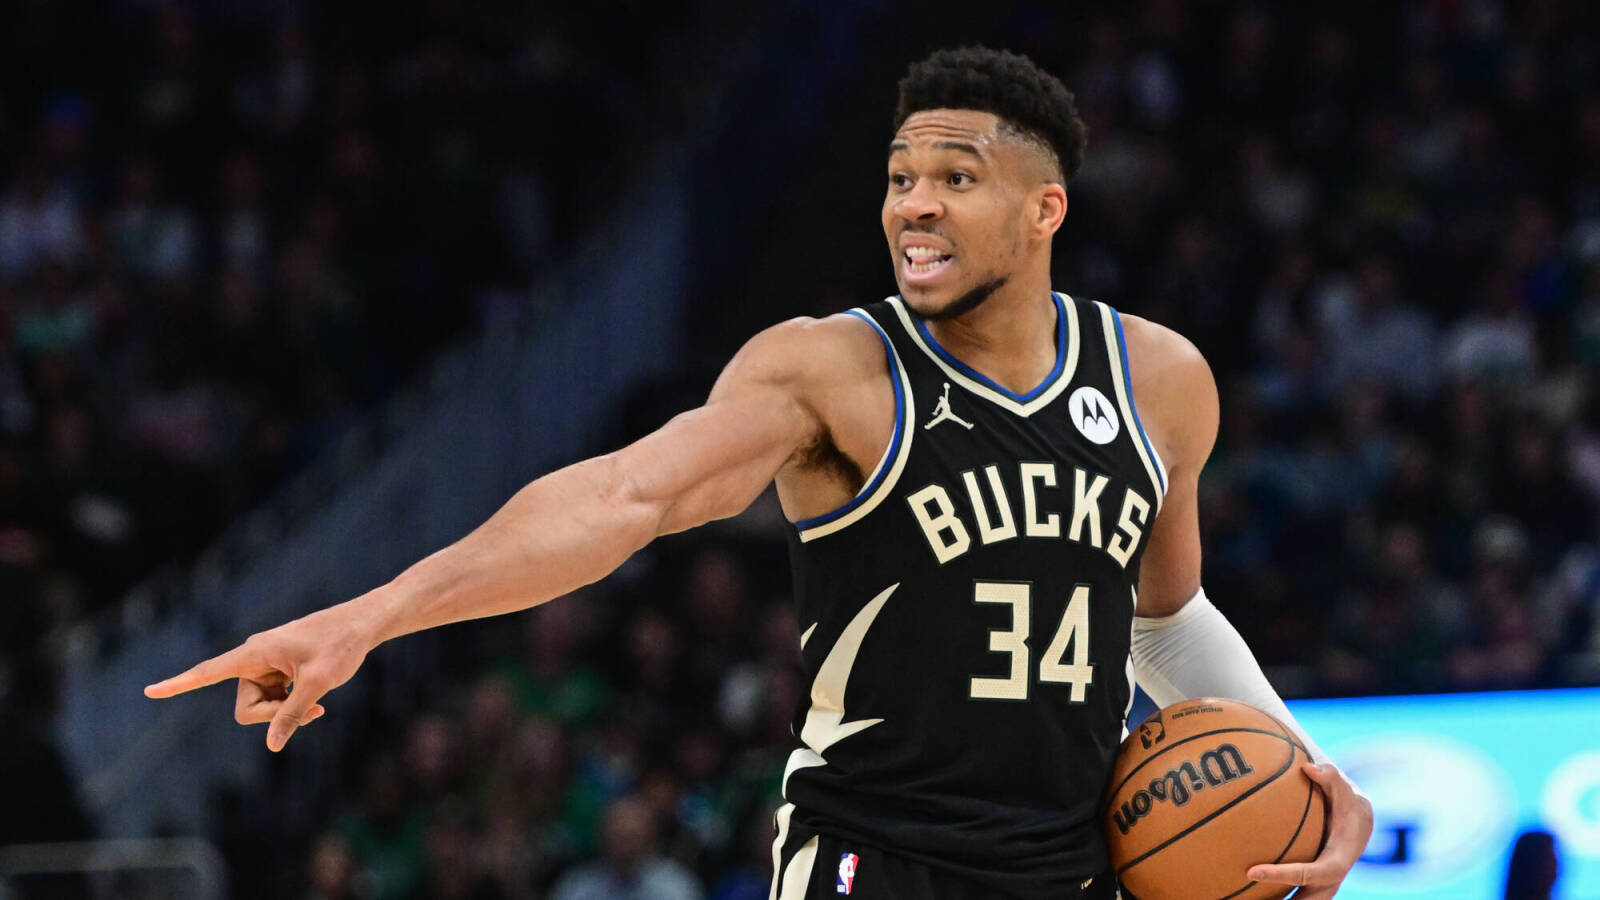 The Bucks' ability to keep Giannis Antetokounmpo rests on this playoff run